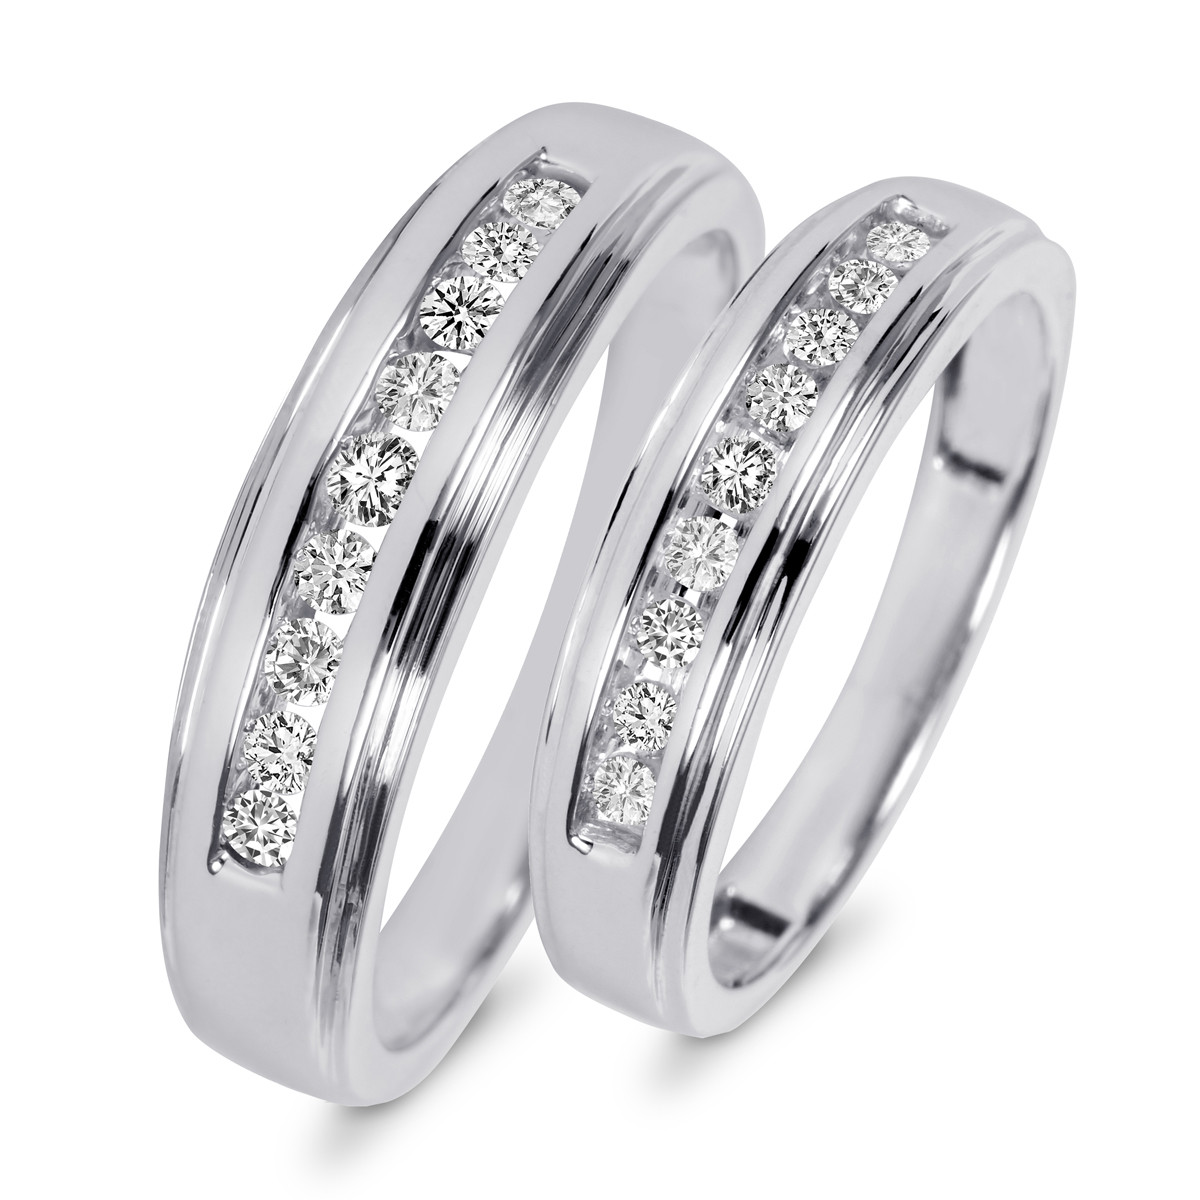 His And Hers Wedding Bands White Gold
 3 8 Carat T W Diamond His And Hers Wedding Band Set 10K